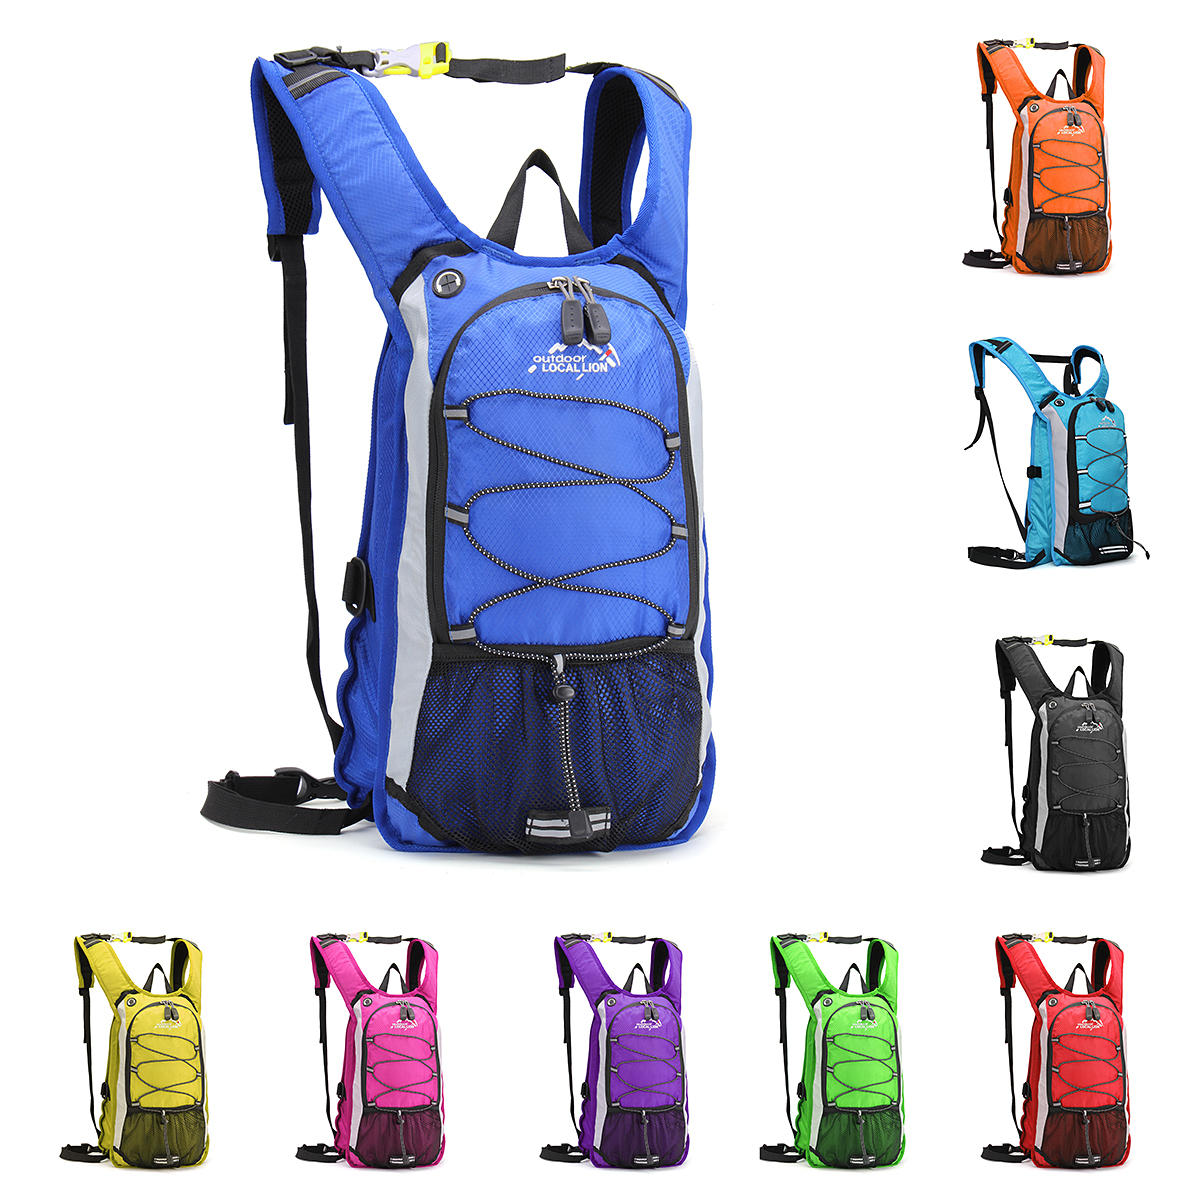 CAMTOA Outdooors Package Waterproof Nylon Shoulder Bag Riding Climbing Hiking Light Weight Backpack